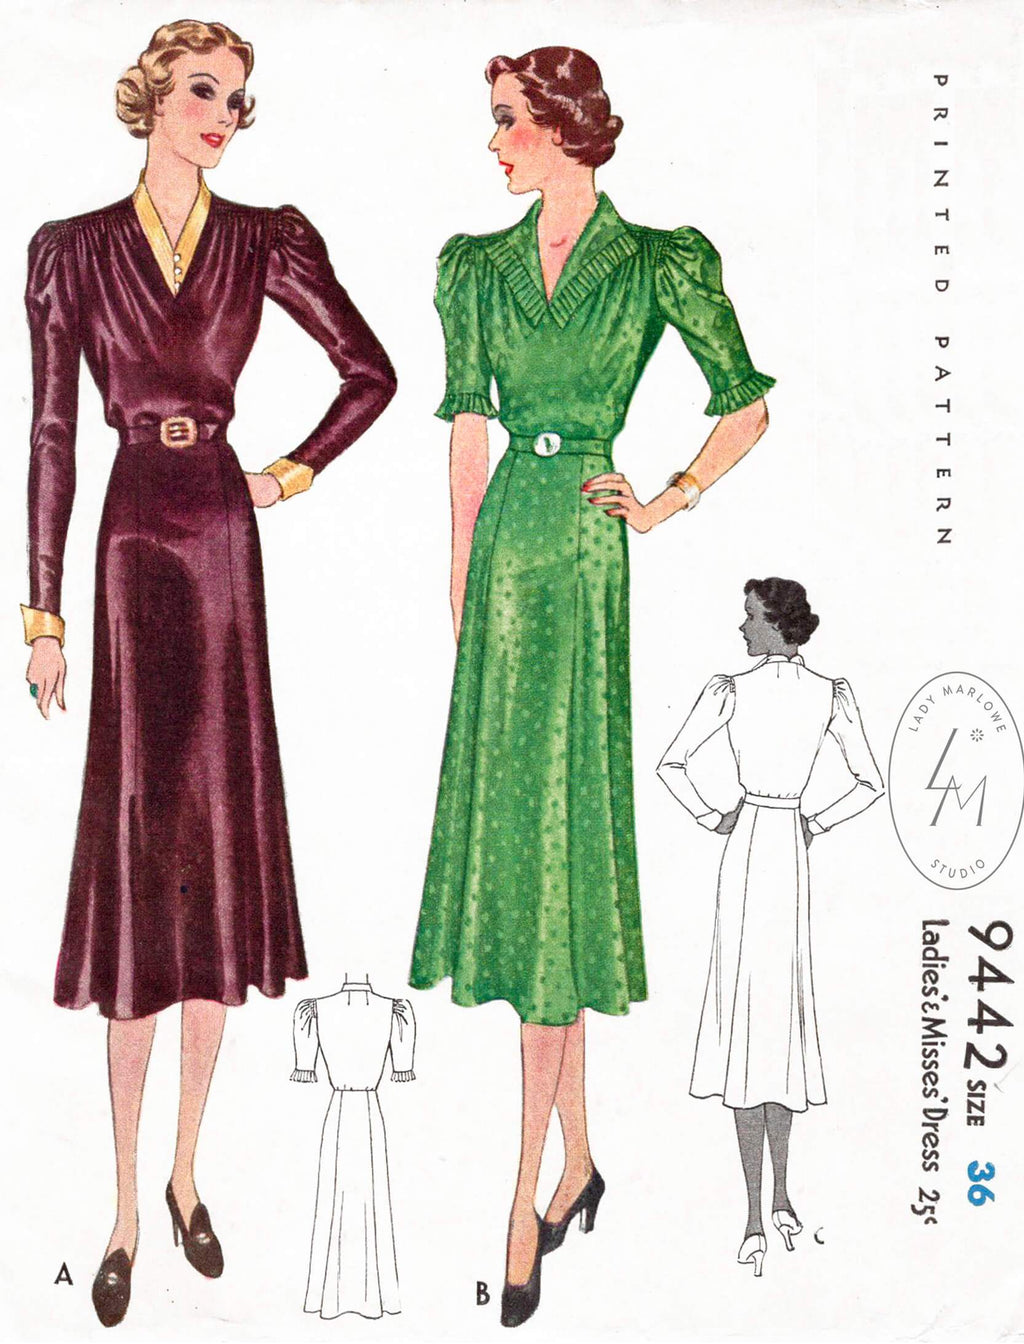 McCall 9442 1930s dress accordion pleat trim vintage sewing pattern reproduction 